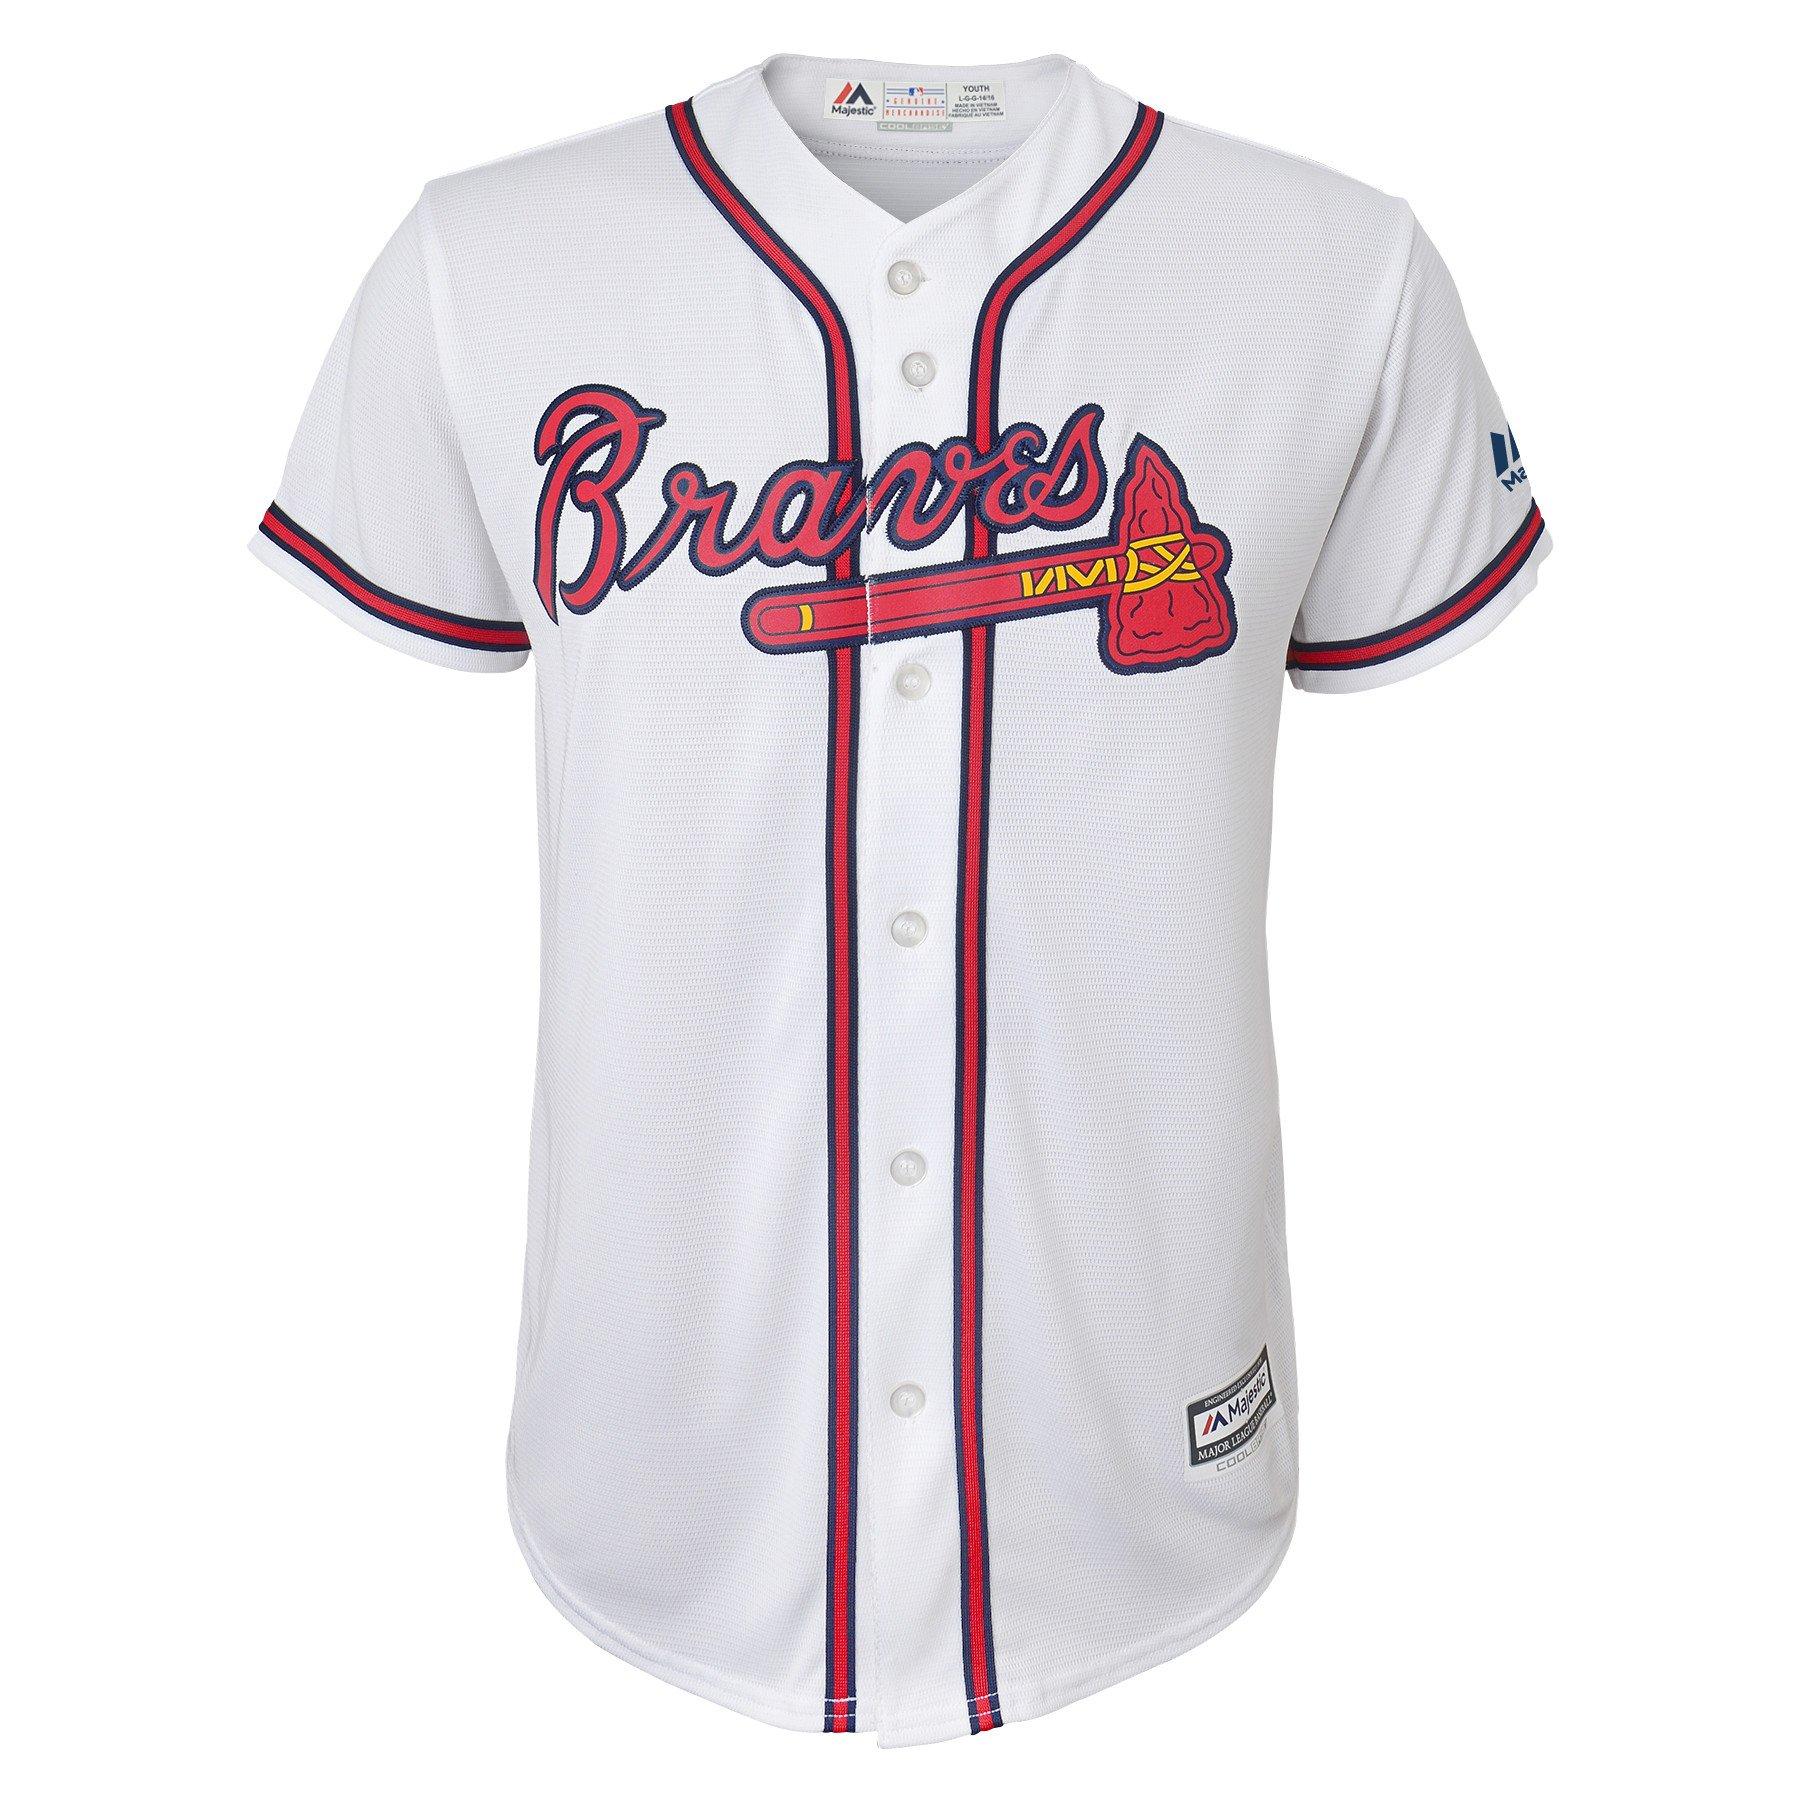 acuna jr youth jersey